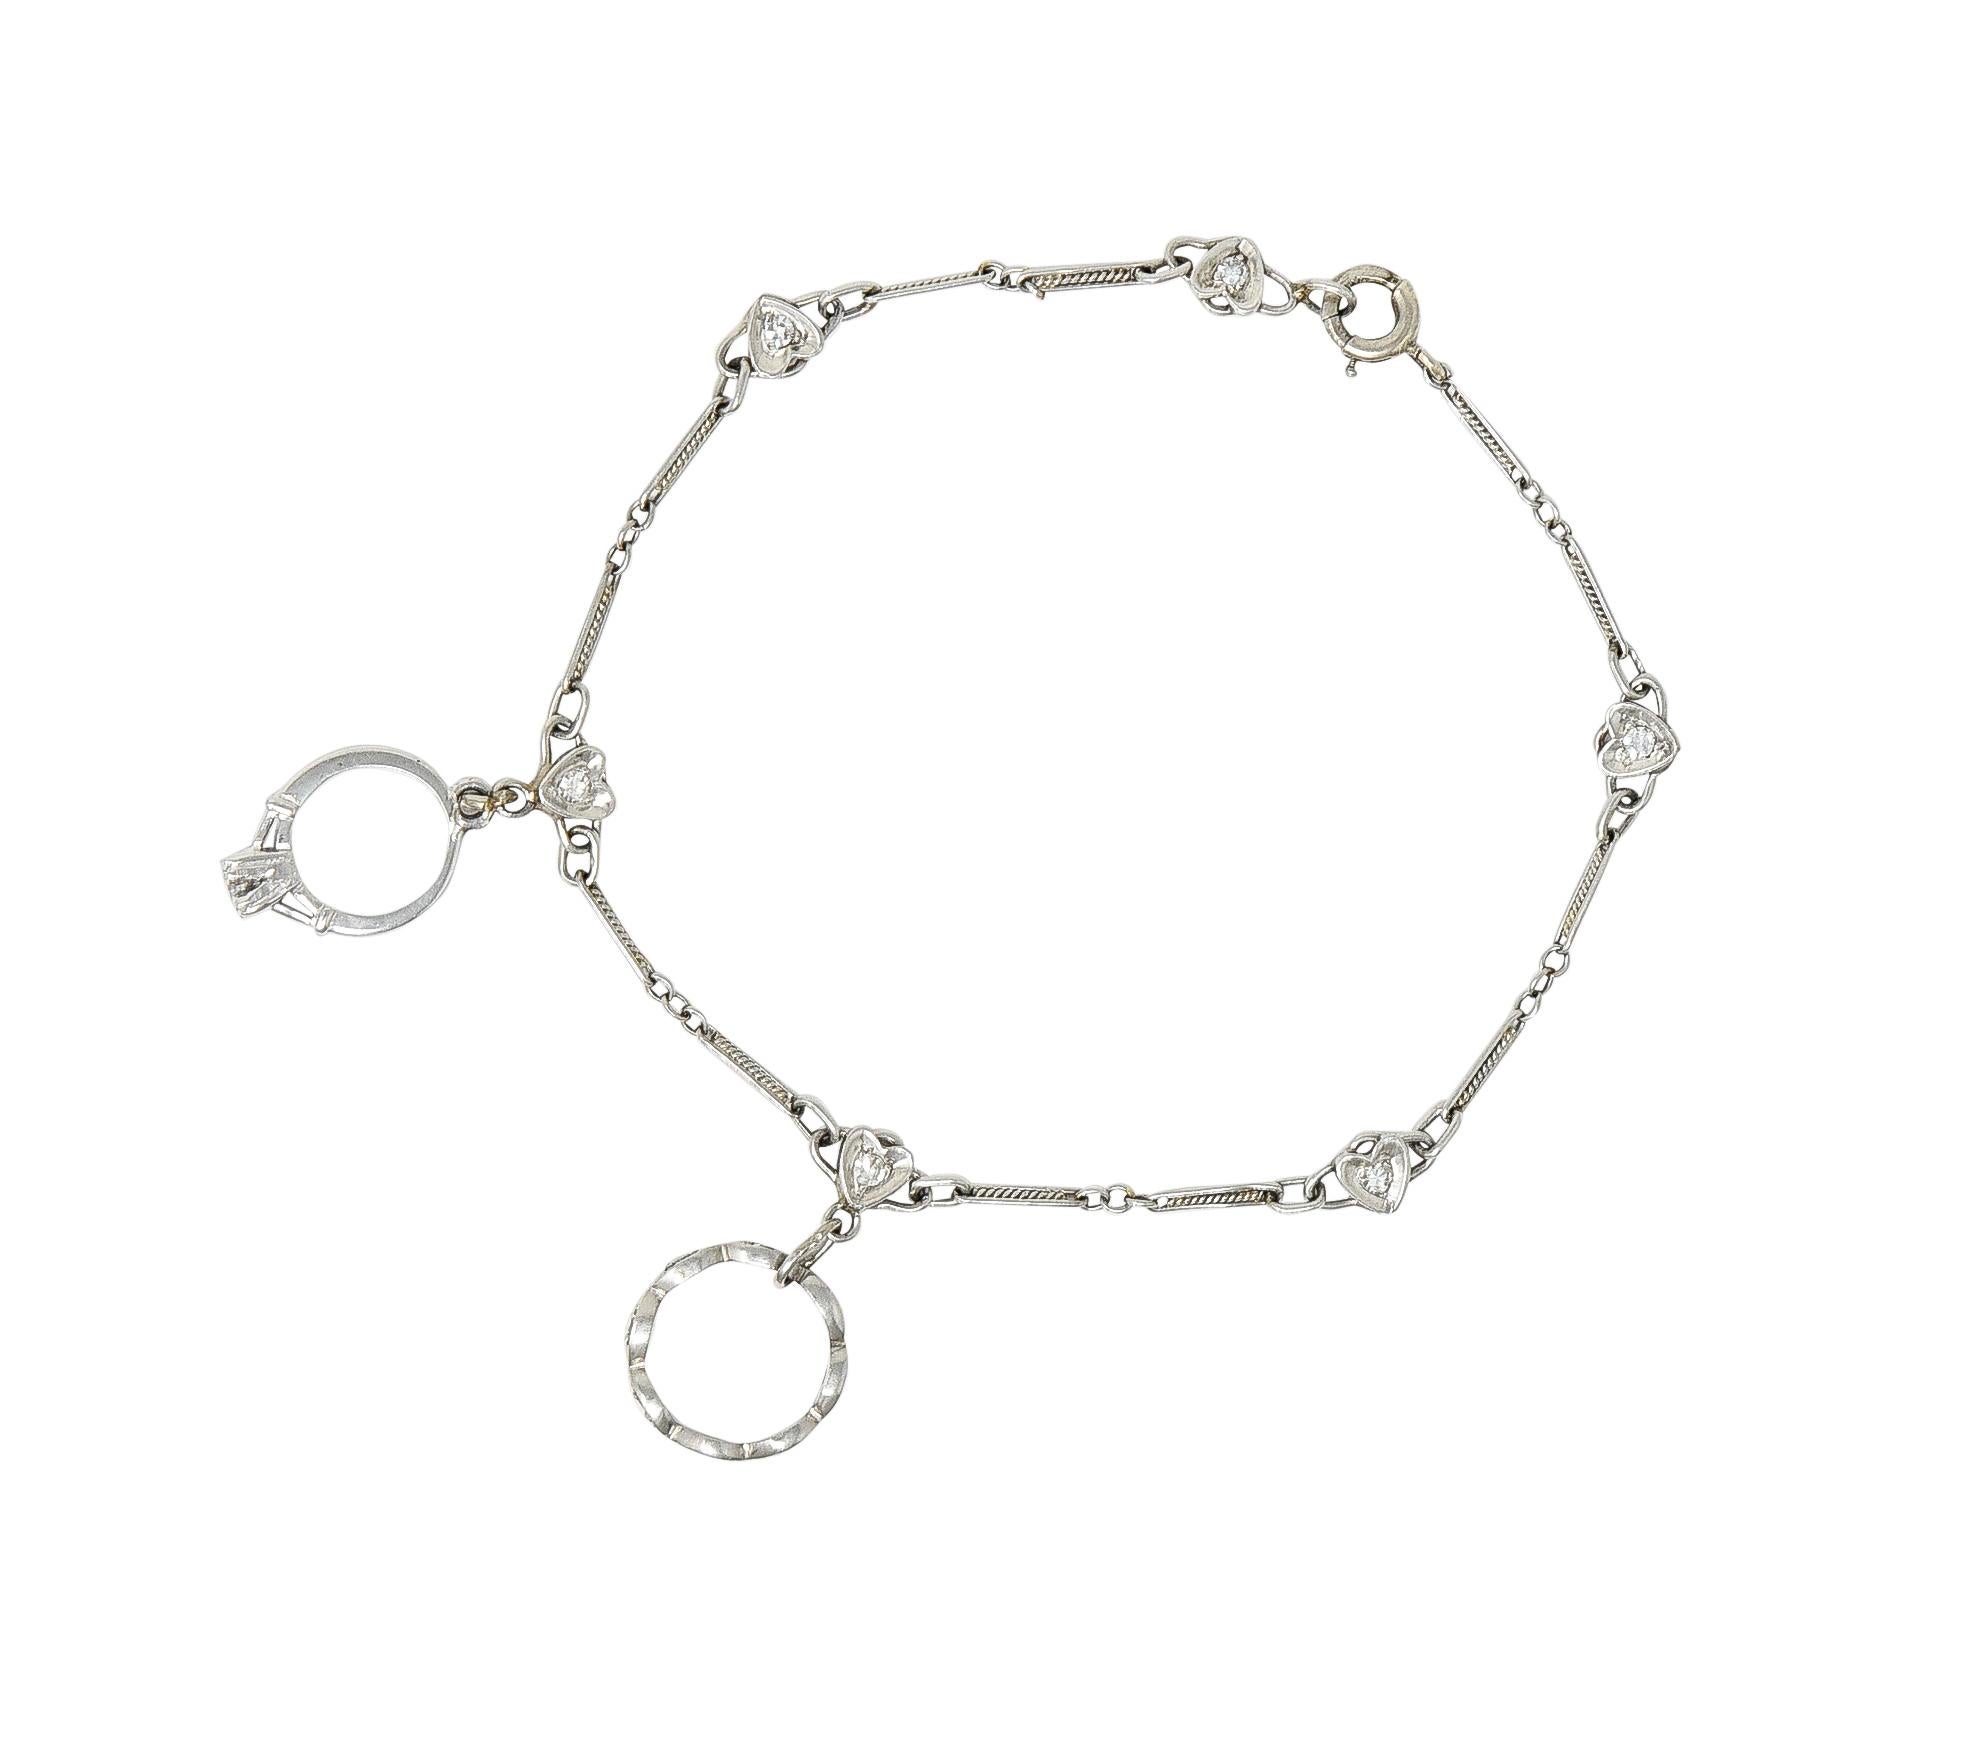 Comprised of a stylized platinum link chain with twisted rope and heart motif links. Suspending charms designed as a wedding band and an engagement ring. White gold and attached via jump ring links. With single cut diamonds throughout. Weighing